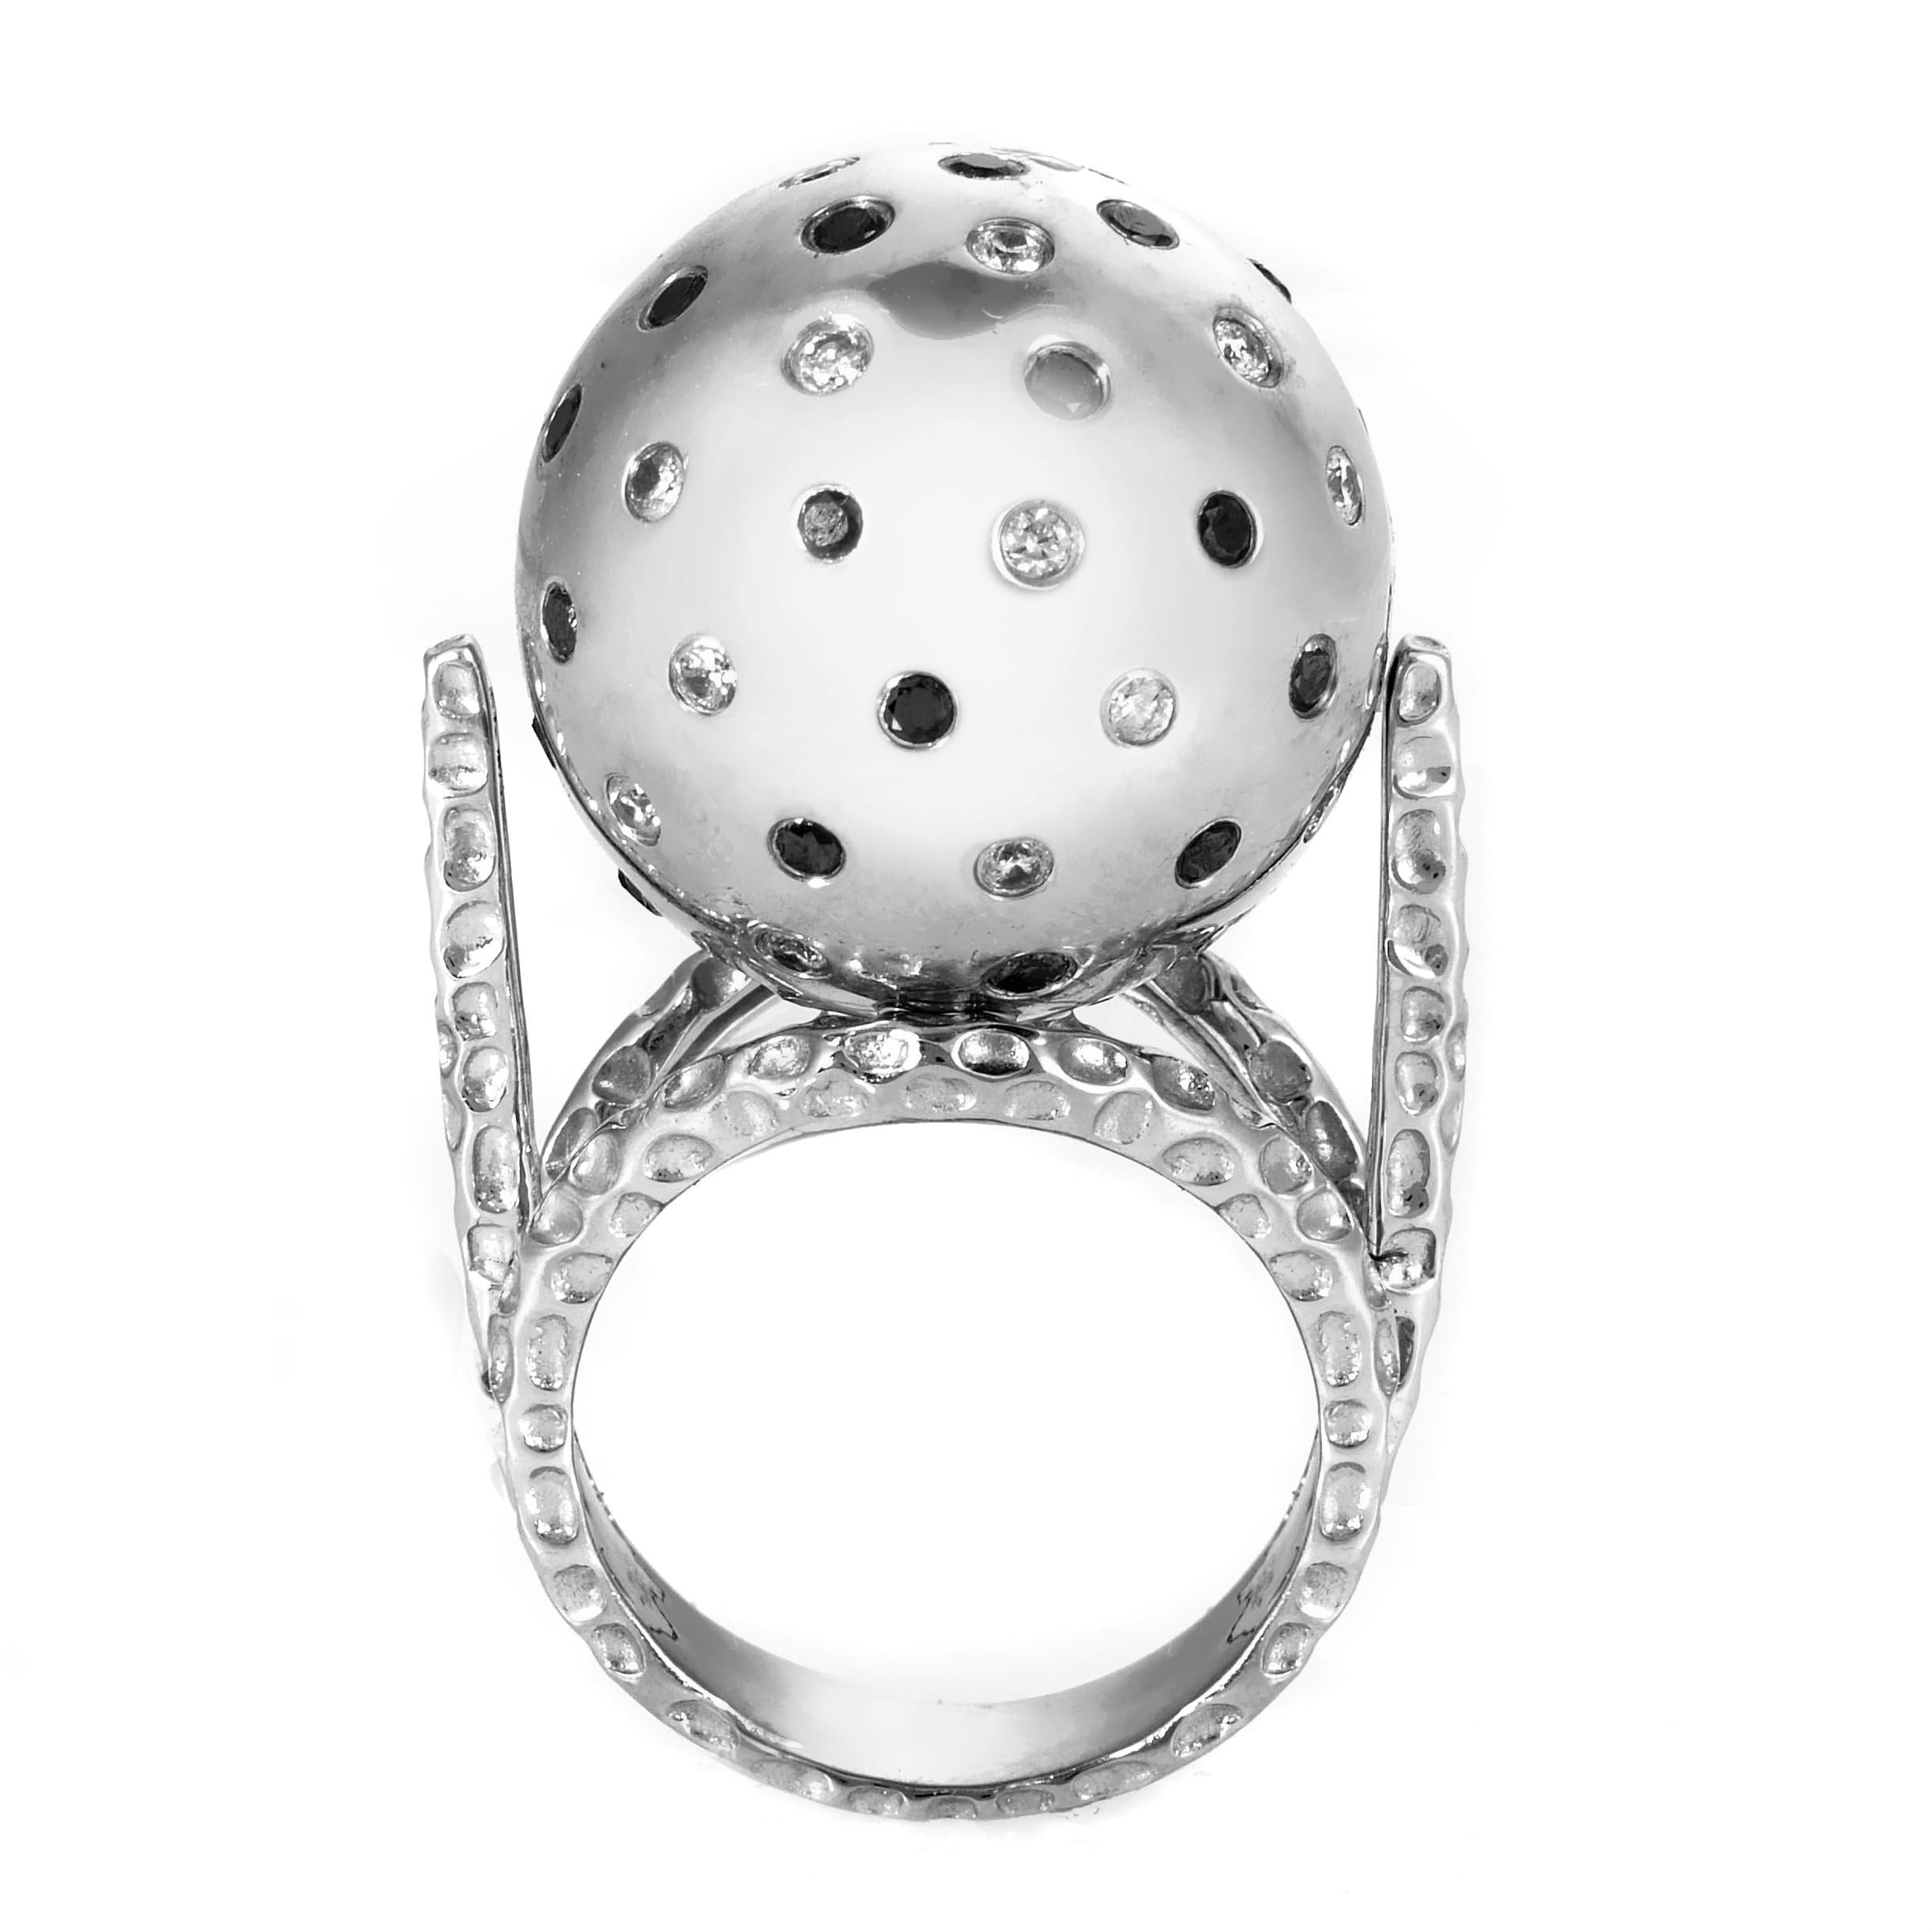 Avant-garde and abstract are the perfect words to describe this highly artistic cocktail ring. The ring is made of 18K white gold and boasts a large spherical accent studded with ~.75ct of black and white diamonds.
Ring Size: 7.0